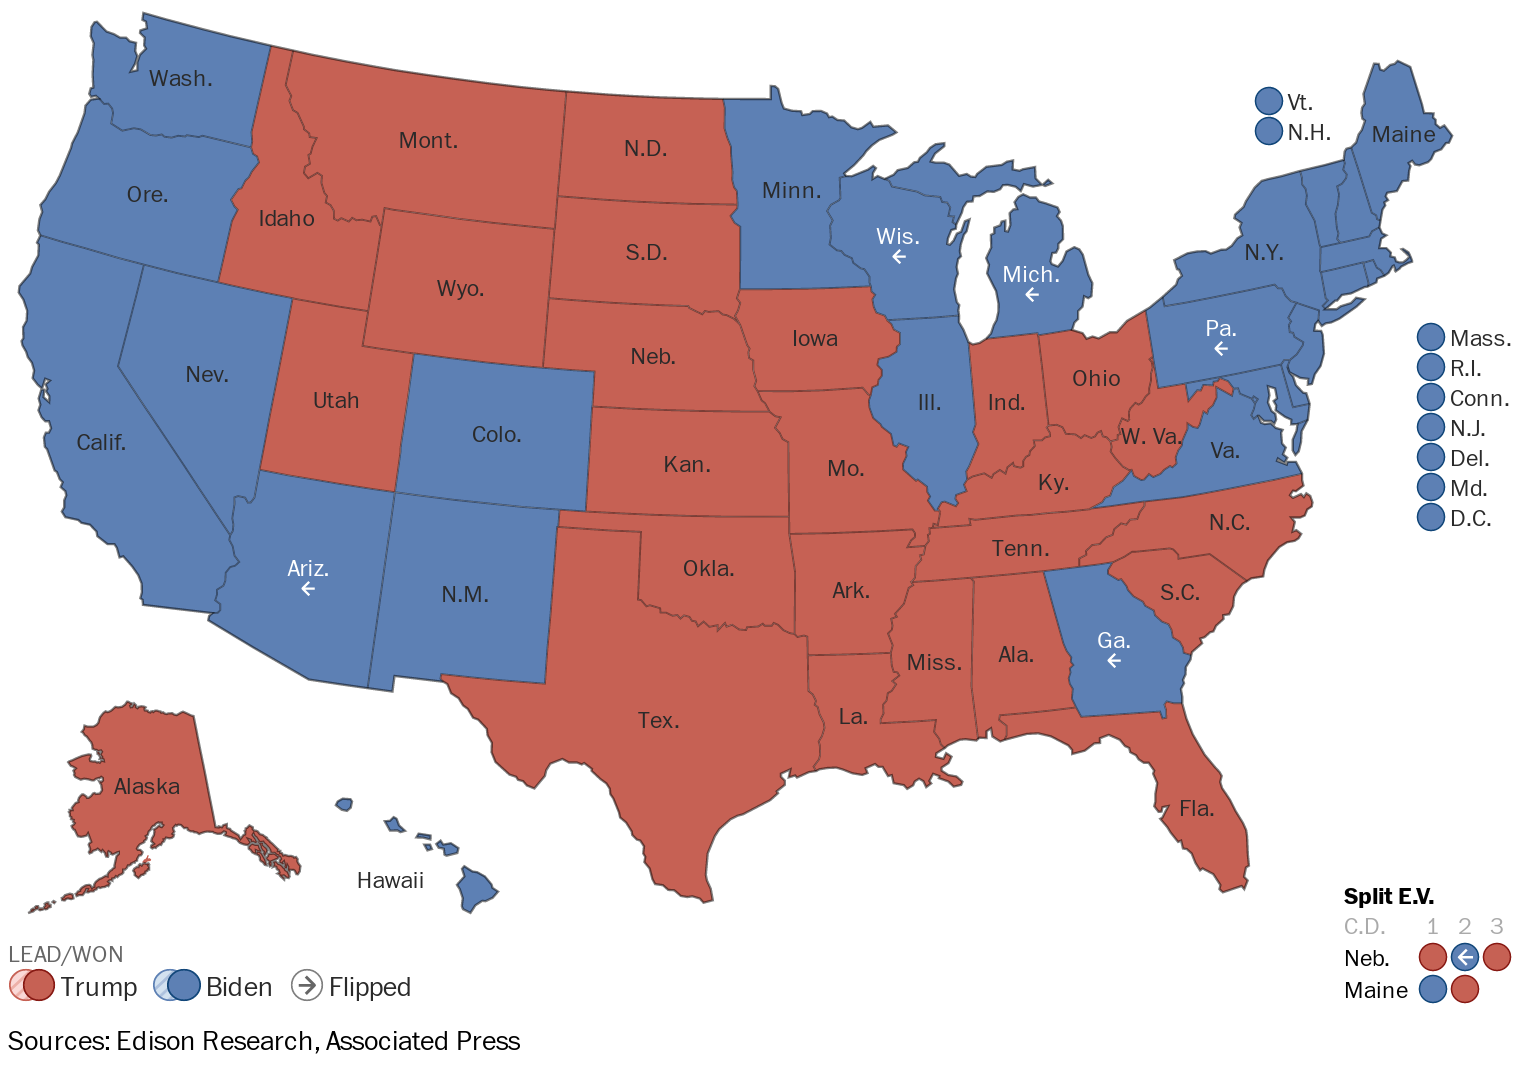 A map showing which states are leading or won by Joe Biden or Donald Trump.